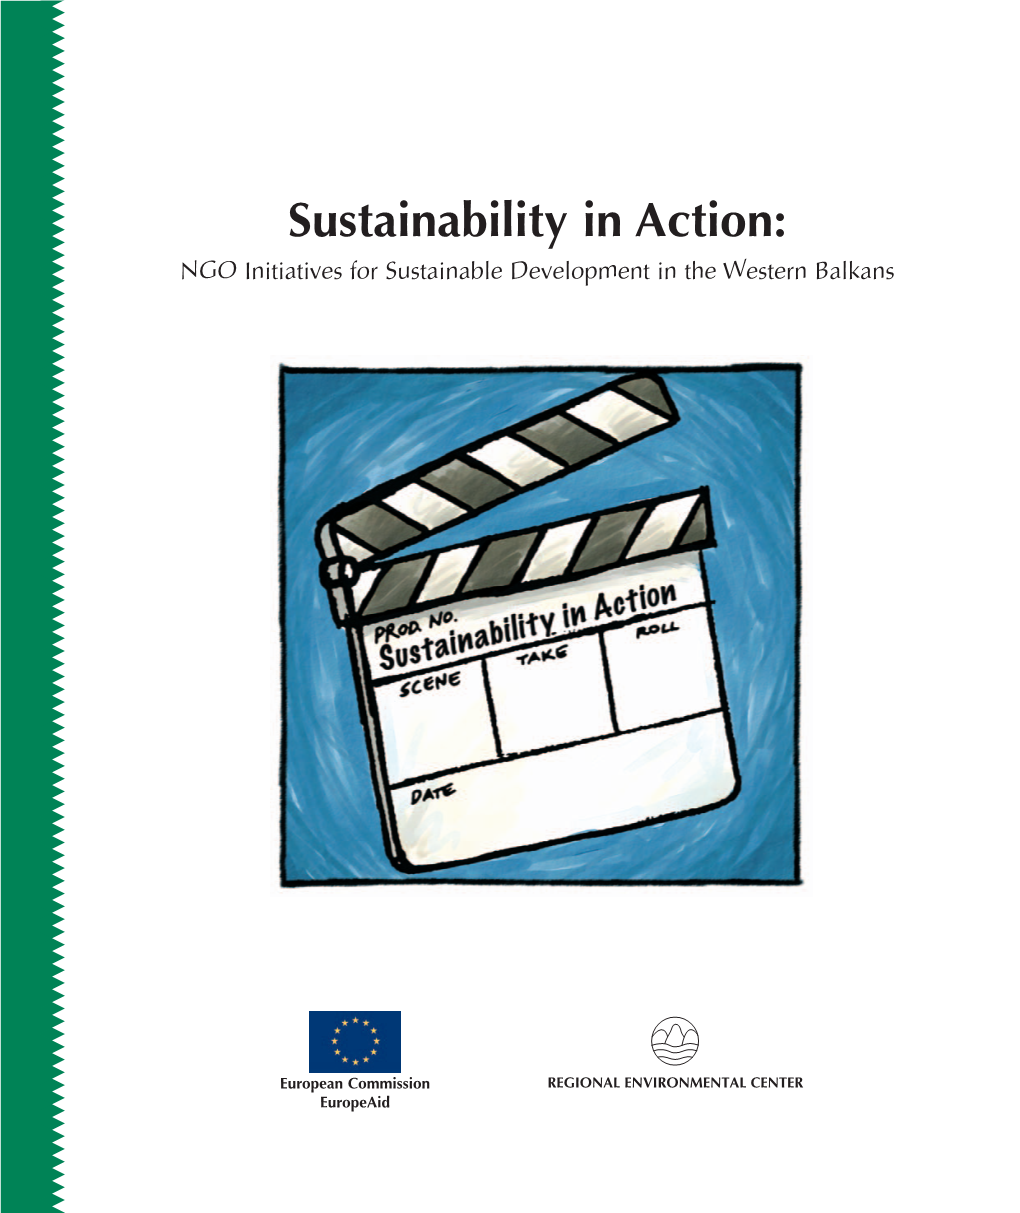 Sustainability in Action: NGO Initiatives for Sustainable Development in the Western Balkans